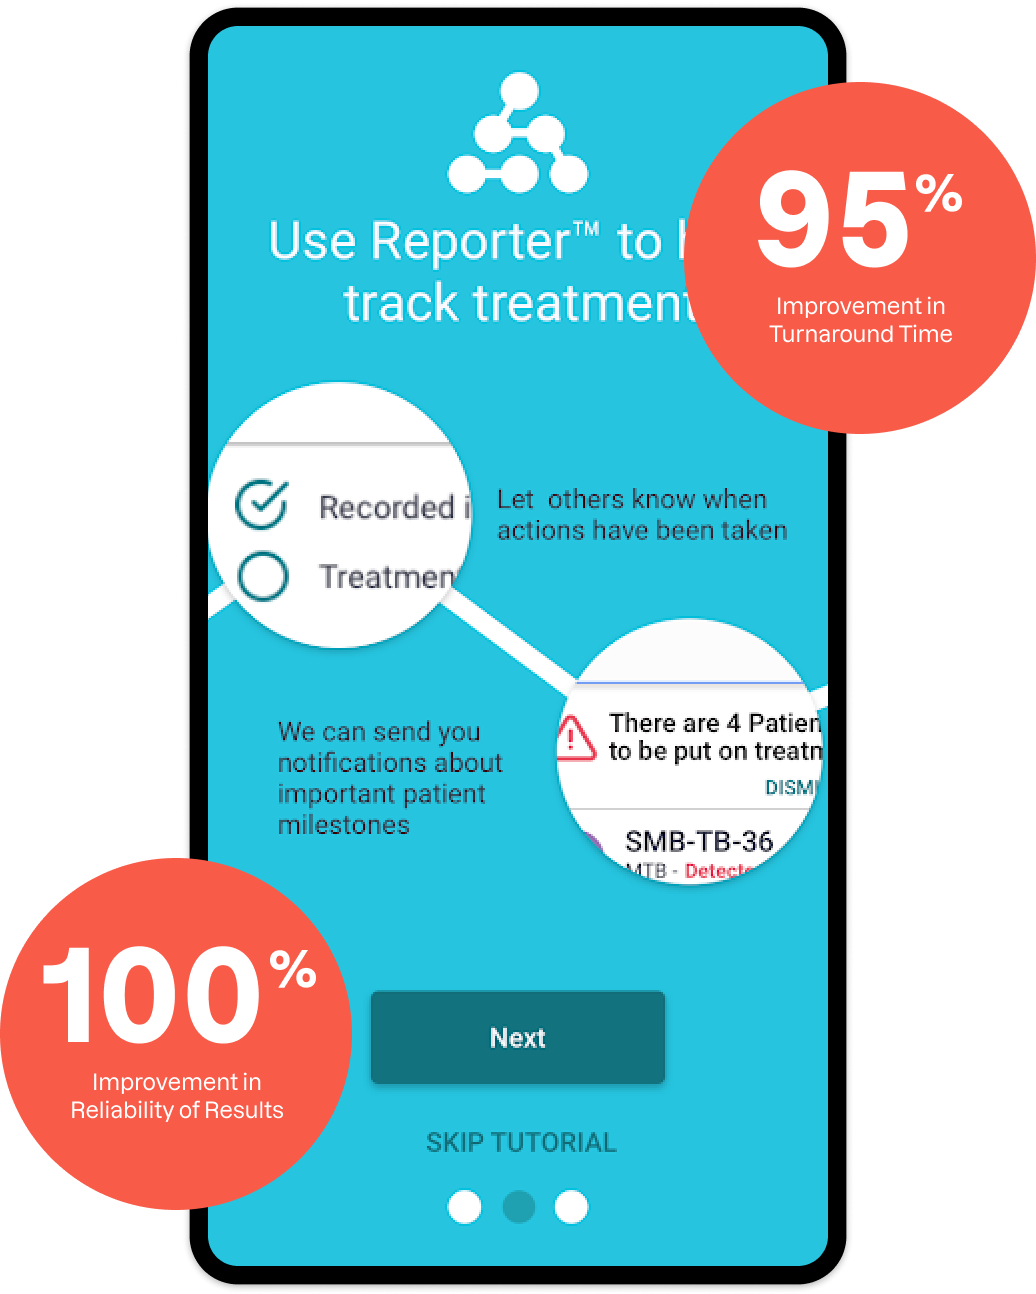 The SystemOne app achieved 95% Improvement in Turnaround Time, and 100% Improvement in Reliability of Results